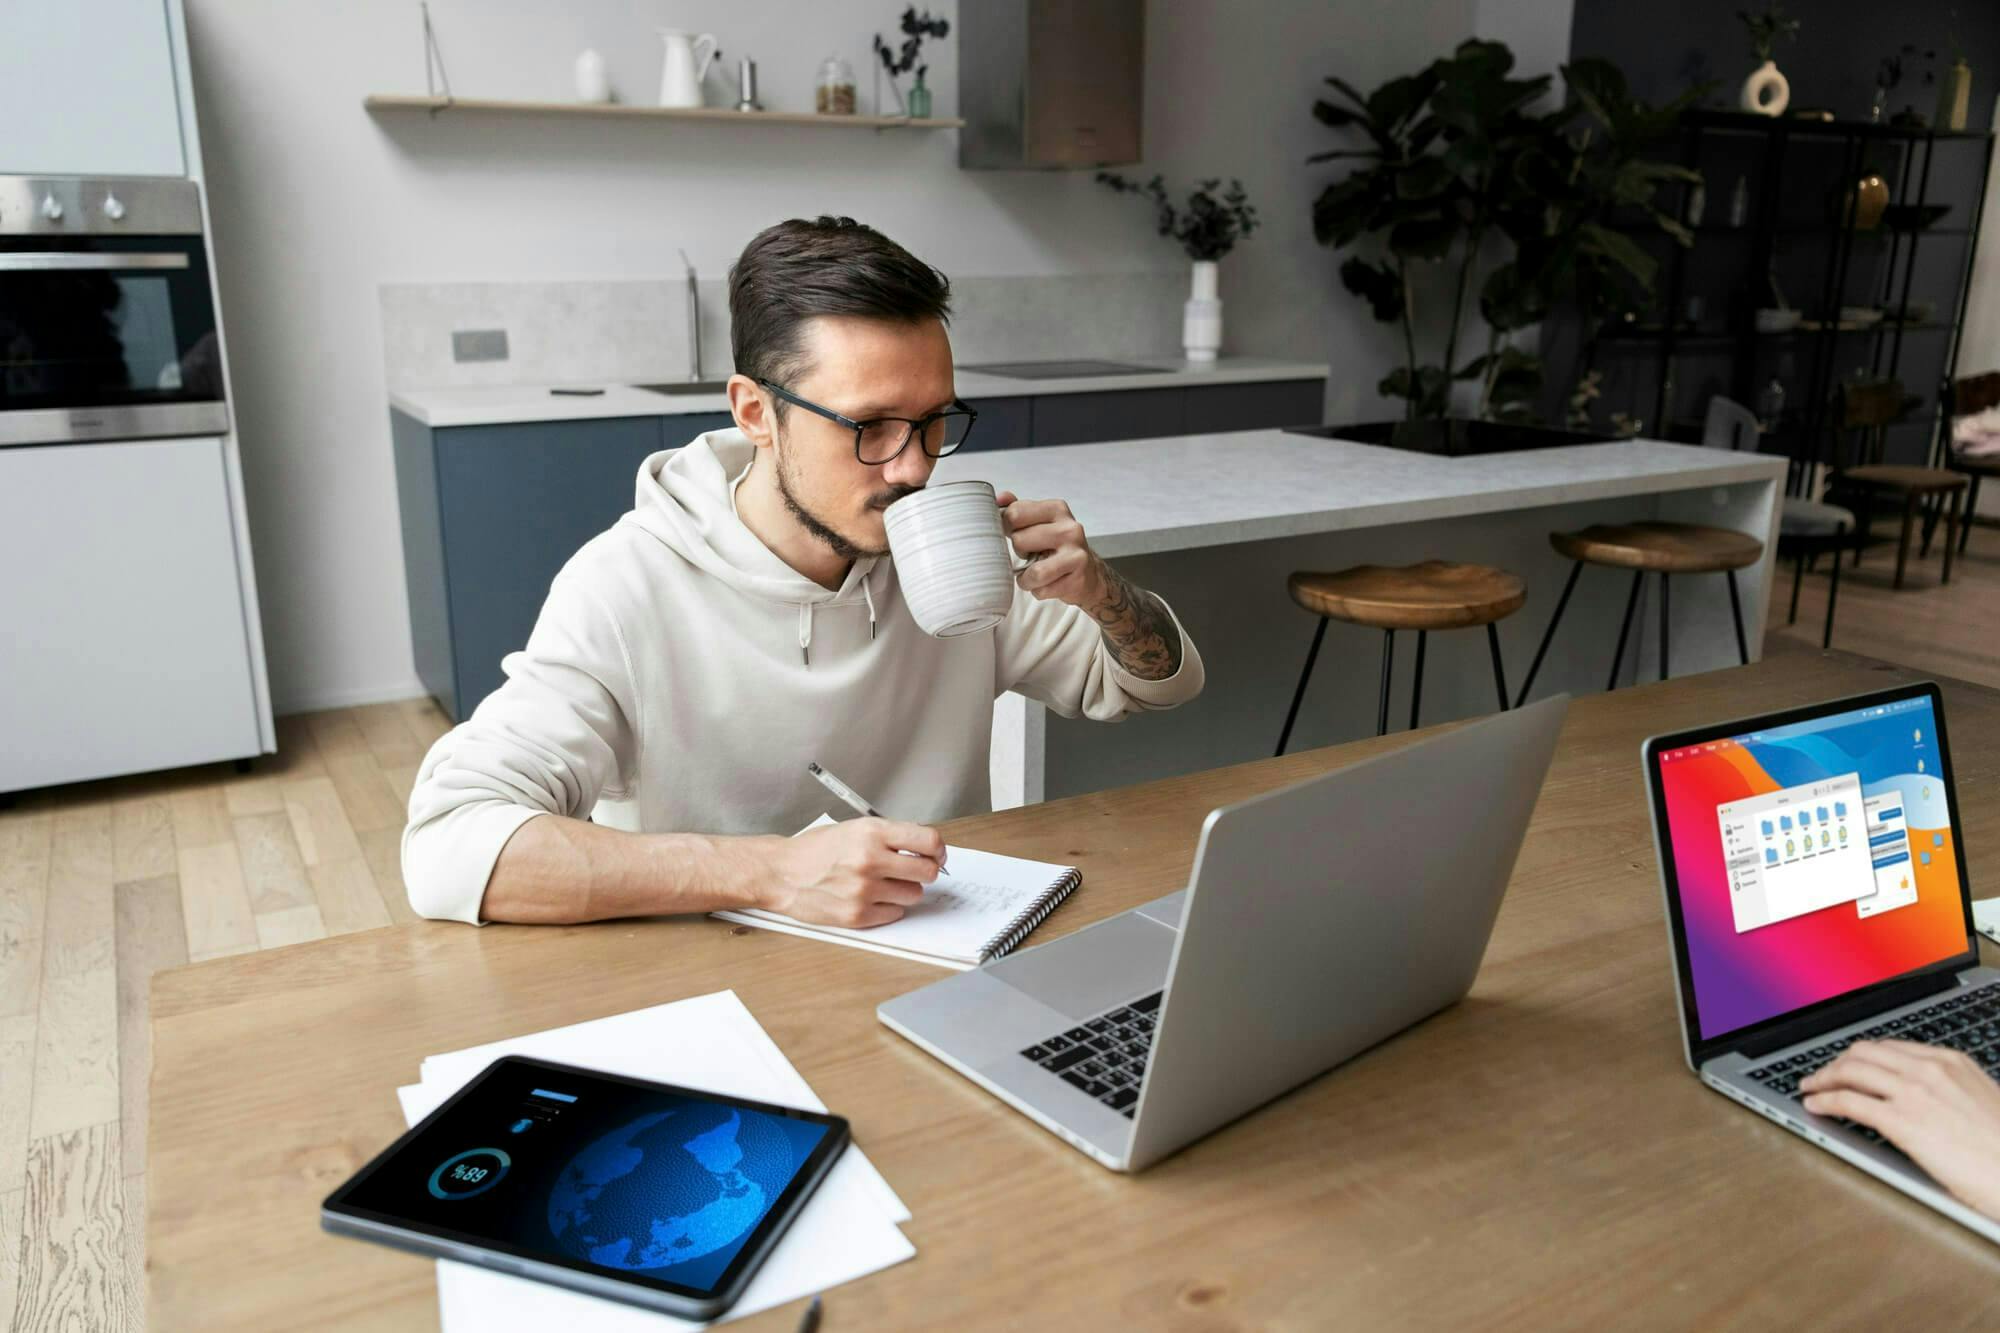 5 BEST Work From Home Jobs to Try in 2022